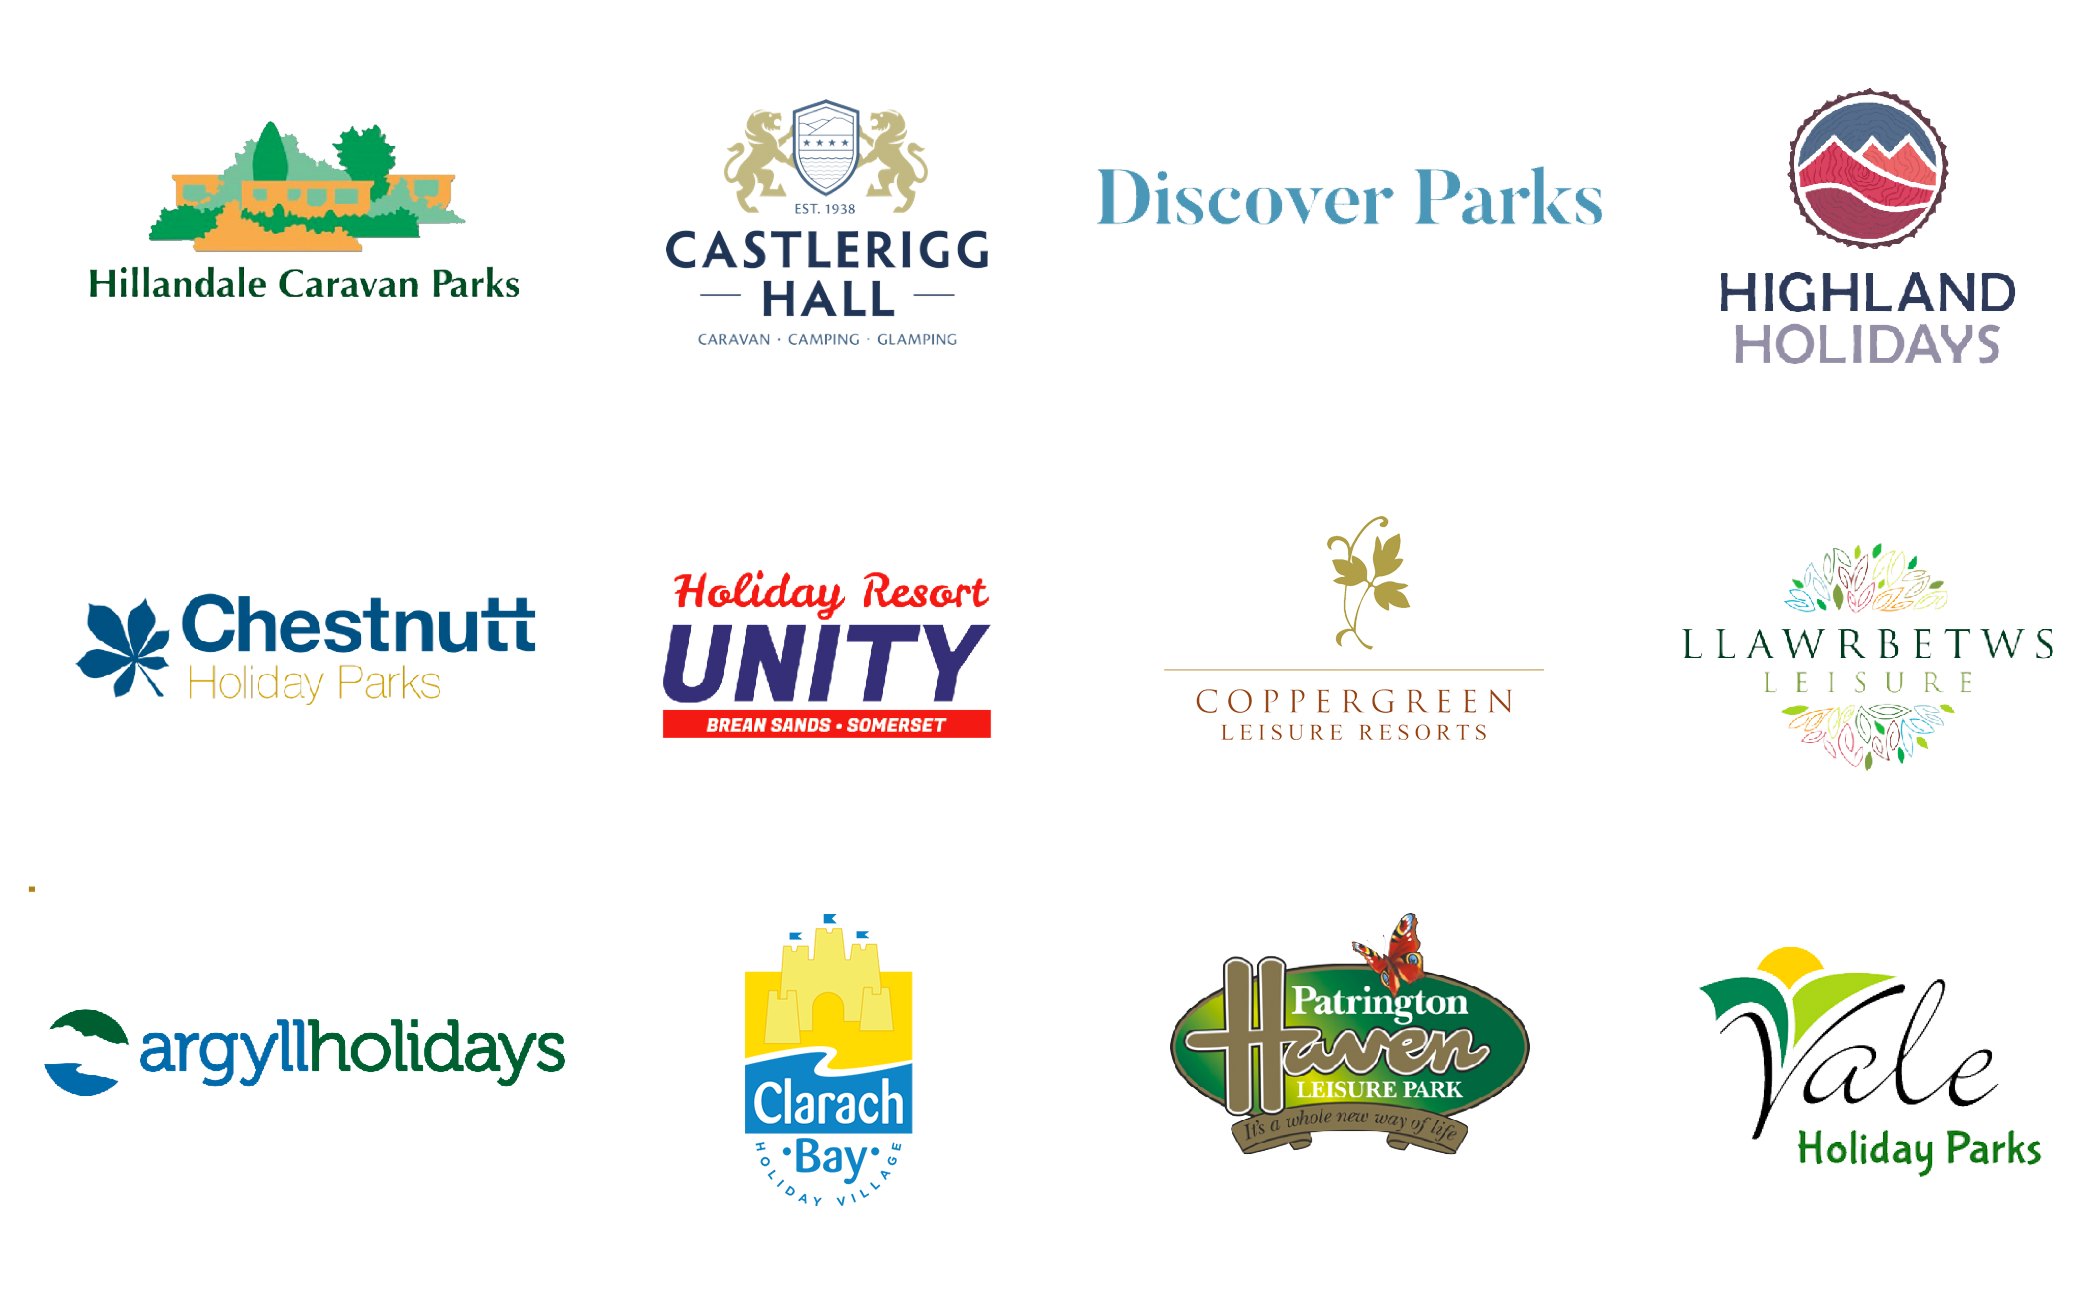 Holiday parks which Park Kit has worked with